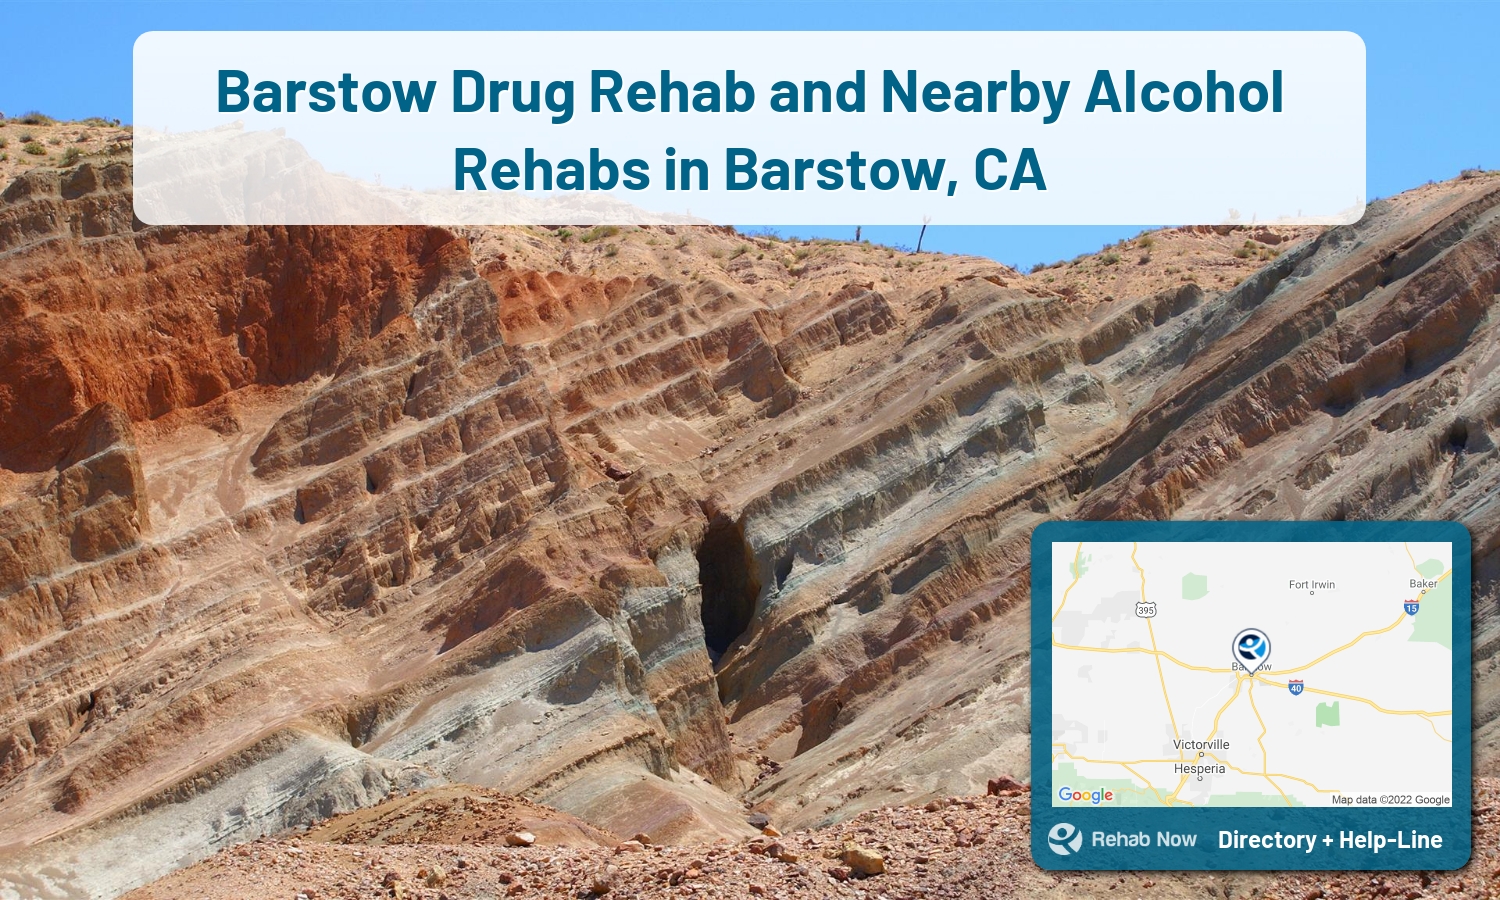 Our experts can help you find treatment now in Barstow, California. We list drug rehab and alcohol centers in California.